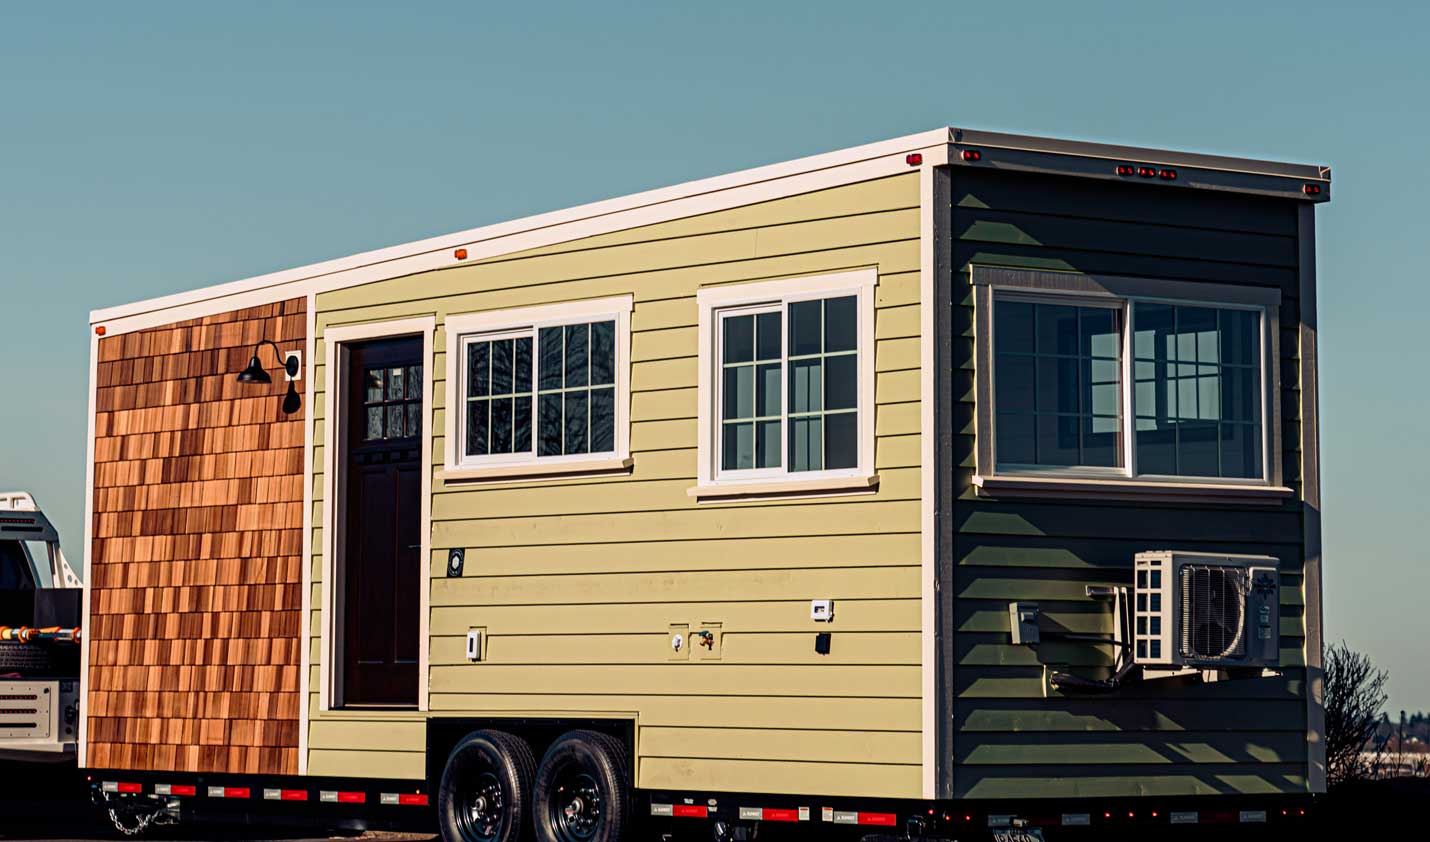 Craftsman style Legacy tiny house for sale as part of the Signature Series line by TIny Heirloom